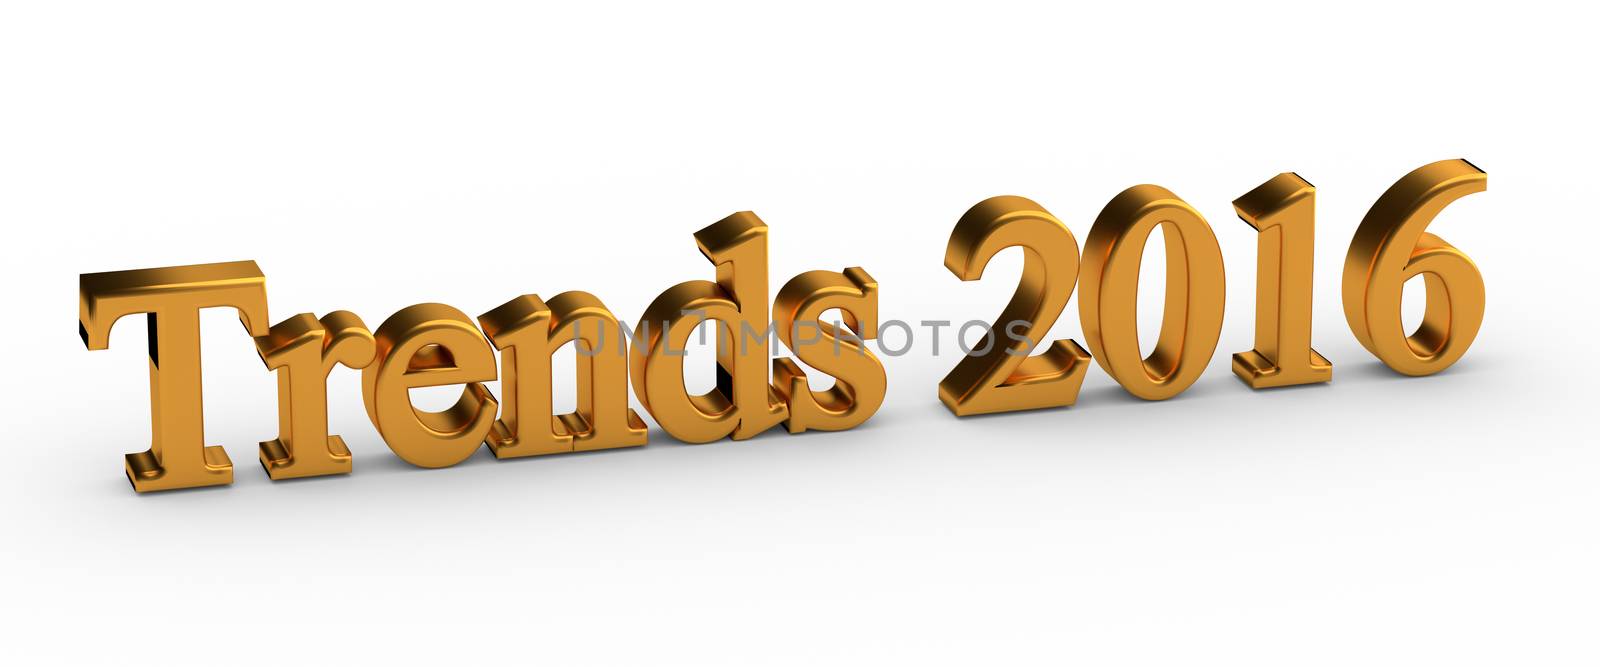 3d words "Trends 2016" isolated on white background